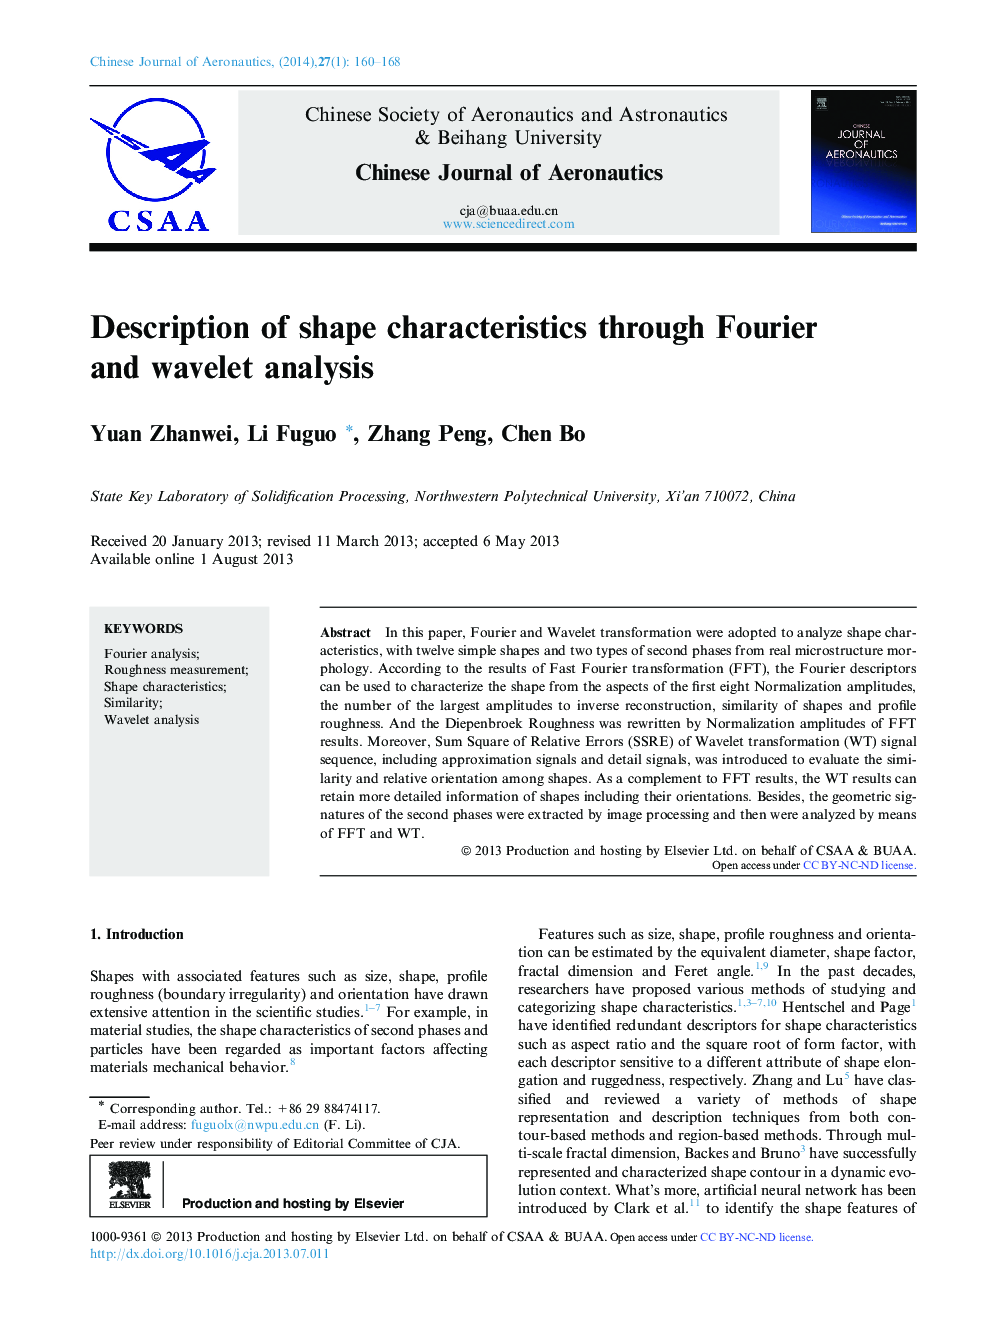 Description of shape characteristics through Fourier and wavelet analysis 